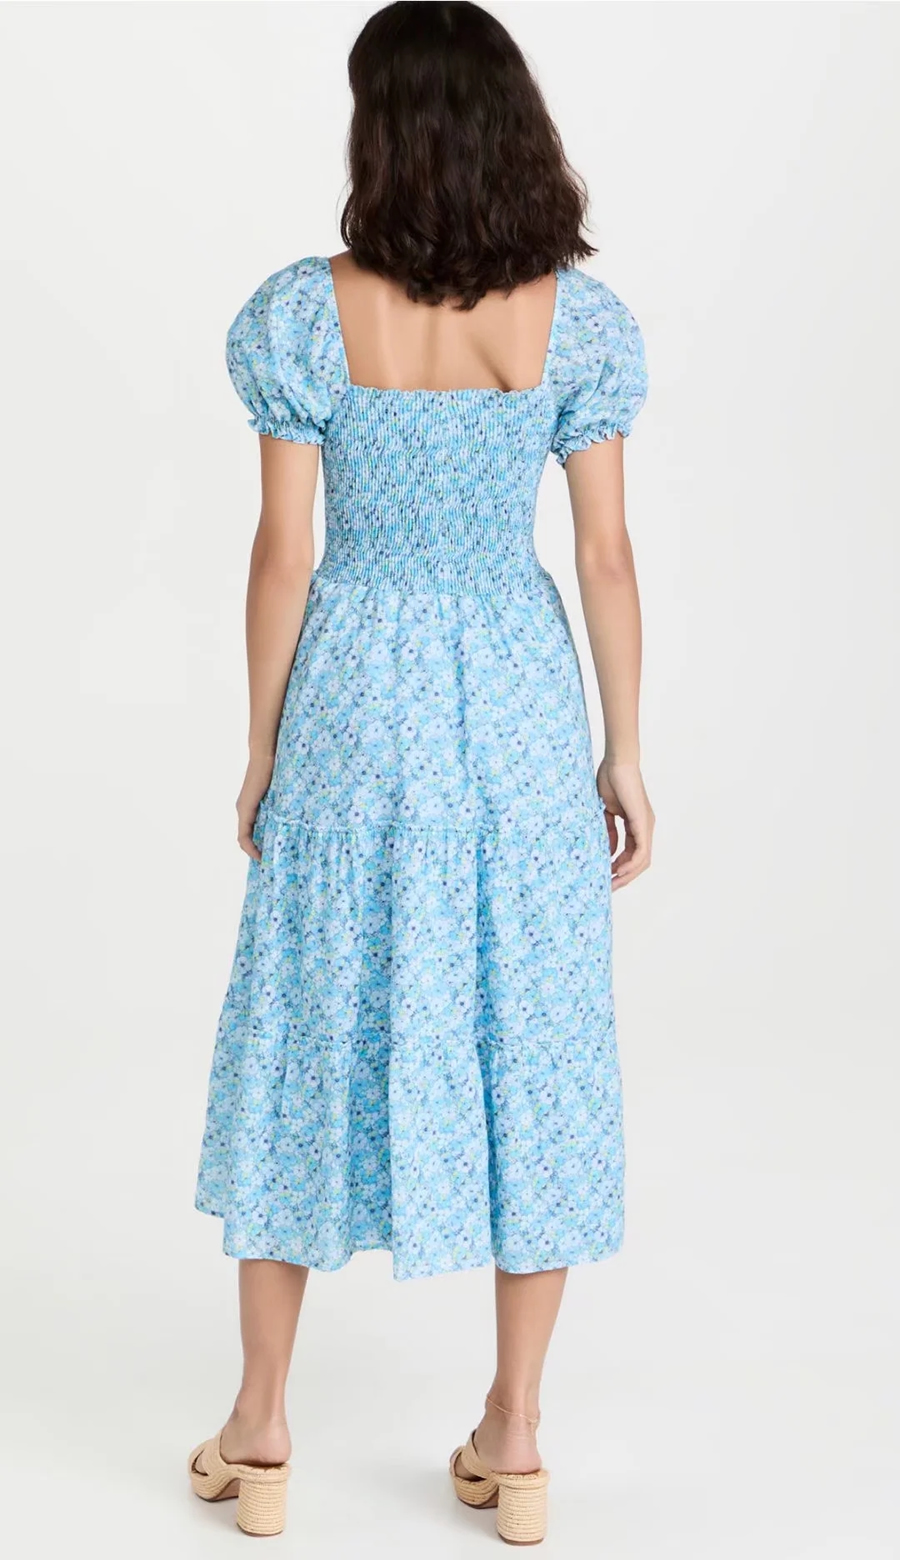 Fashion Blue Printed Square Neck Pleated Pillow Dress,Long Dress